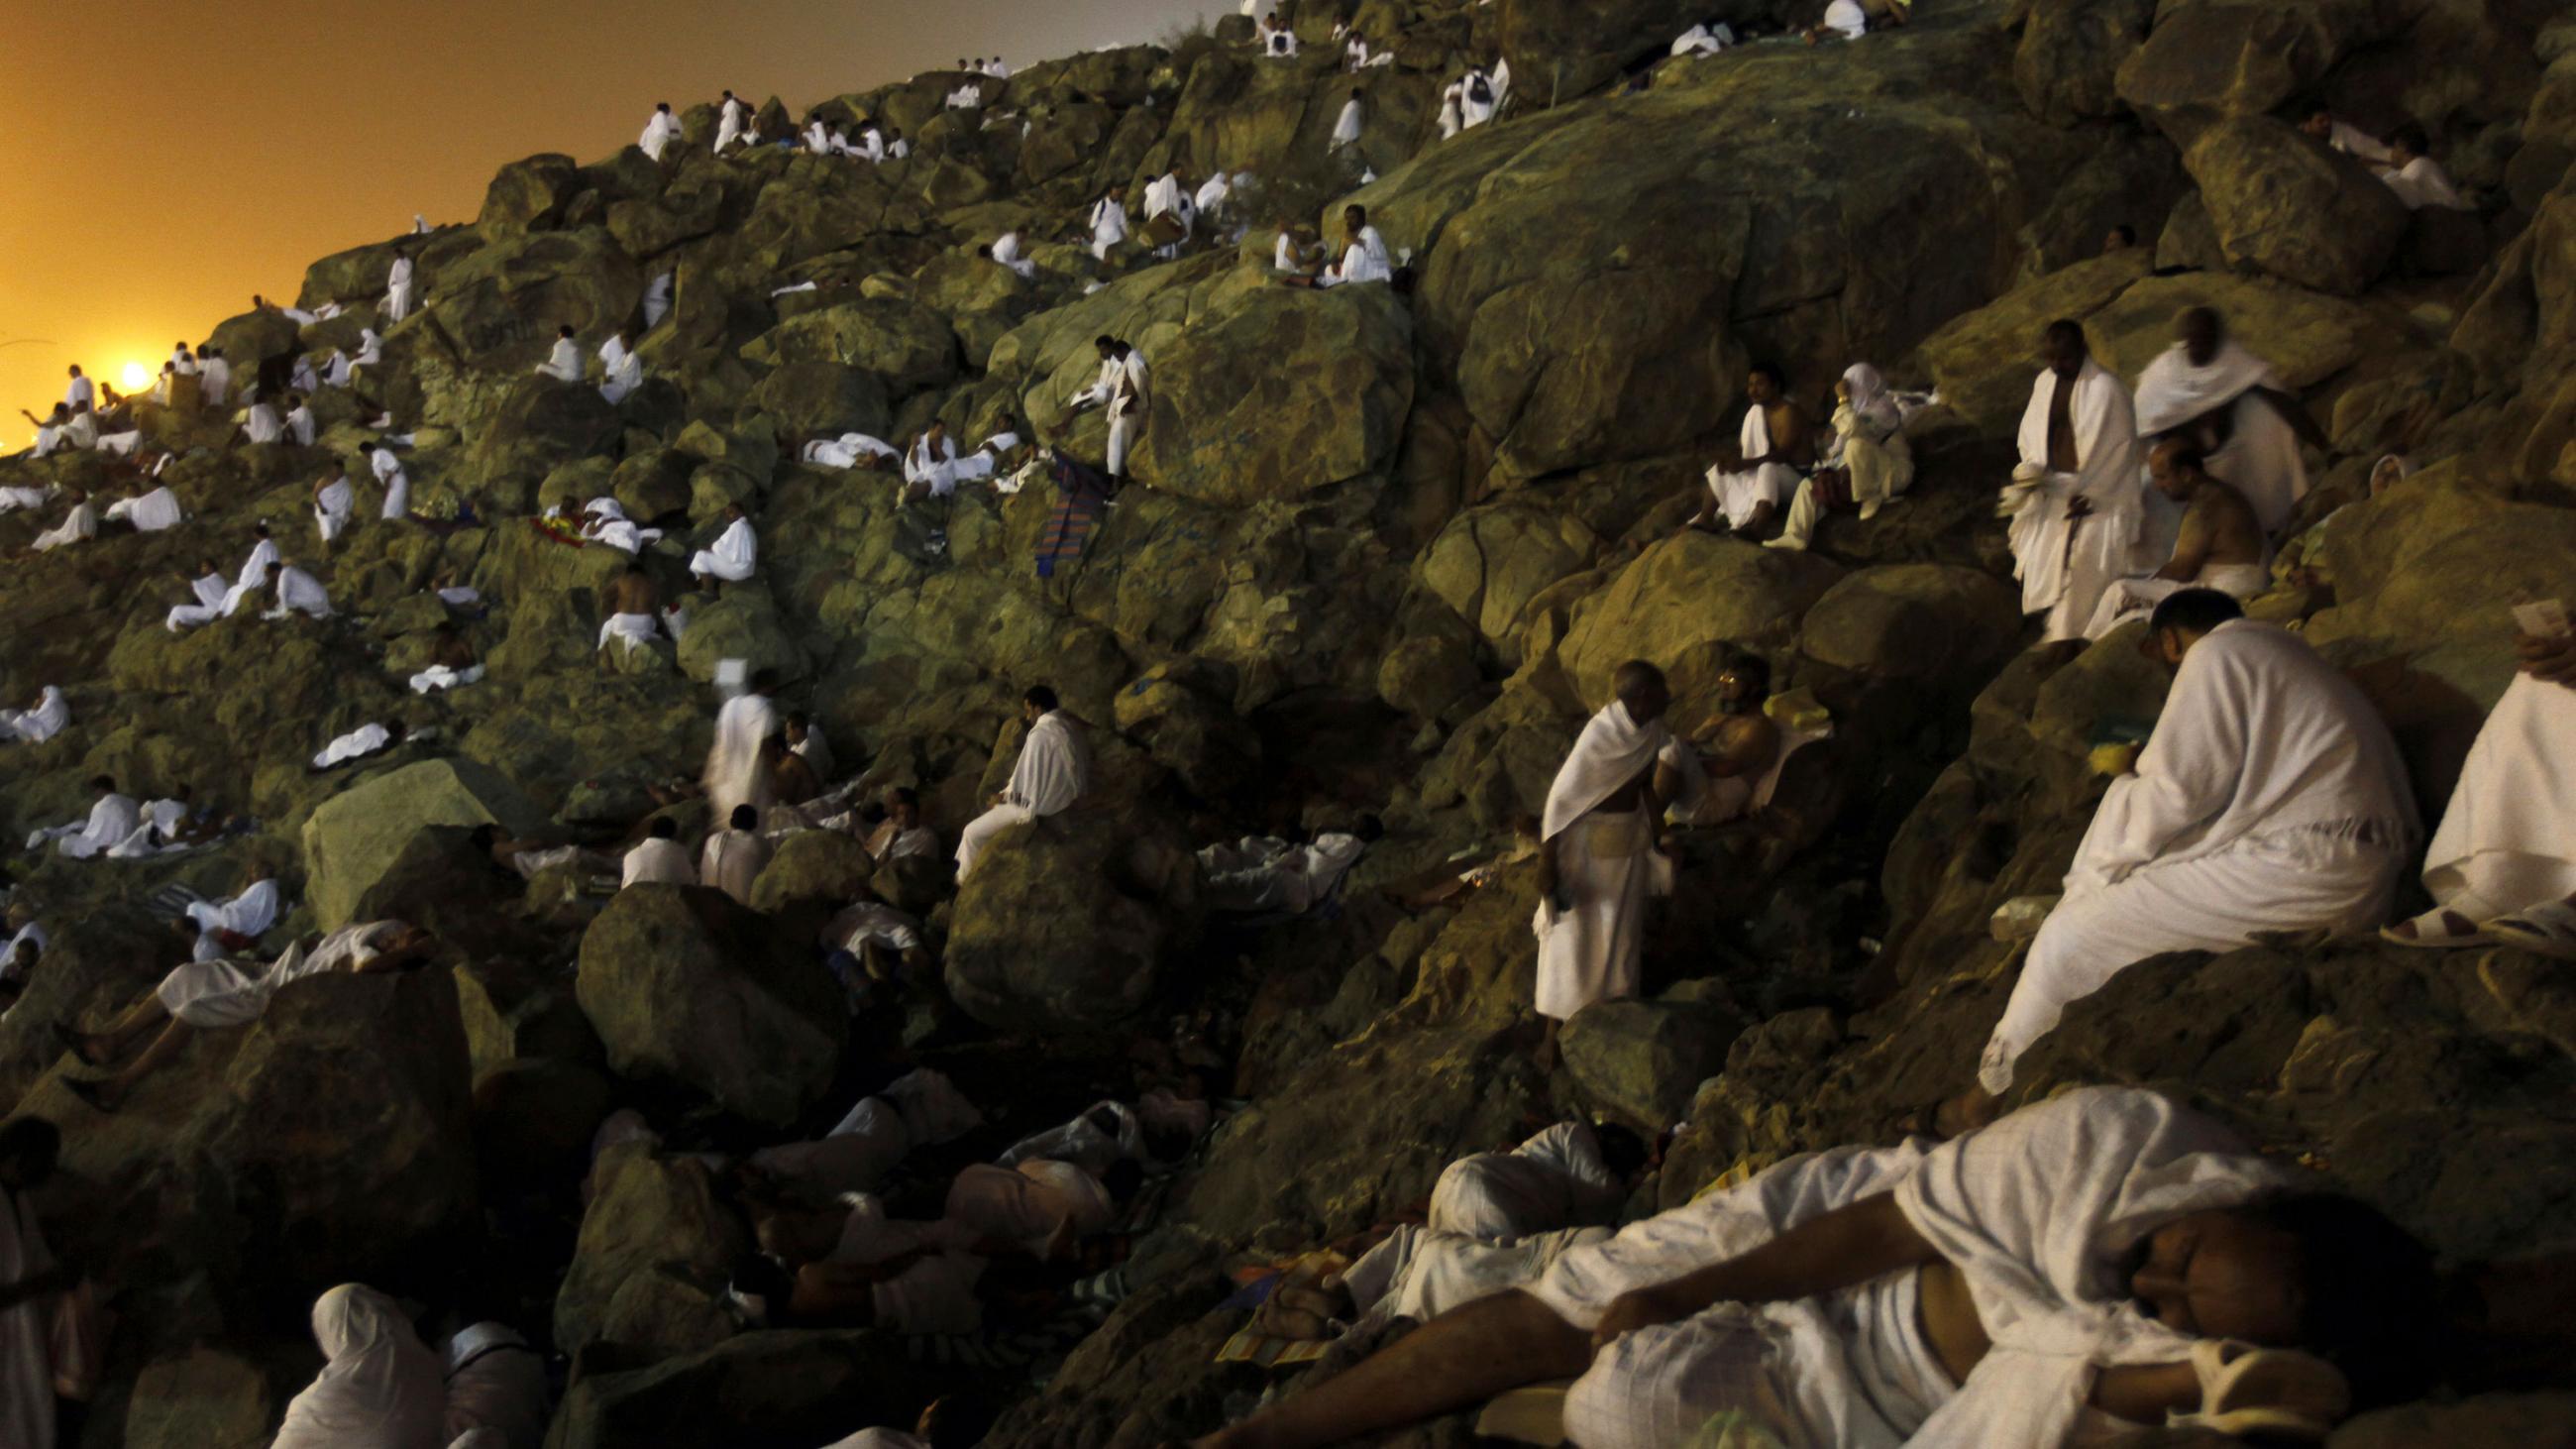 The photo is stunning. Dawn is breaking over the mountain, and hundreds of pilgrims wearing simple white robes are resting on the rocks in twos and threes. 